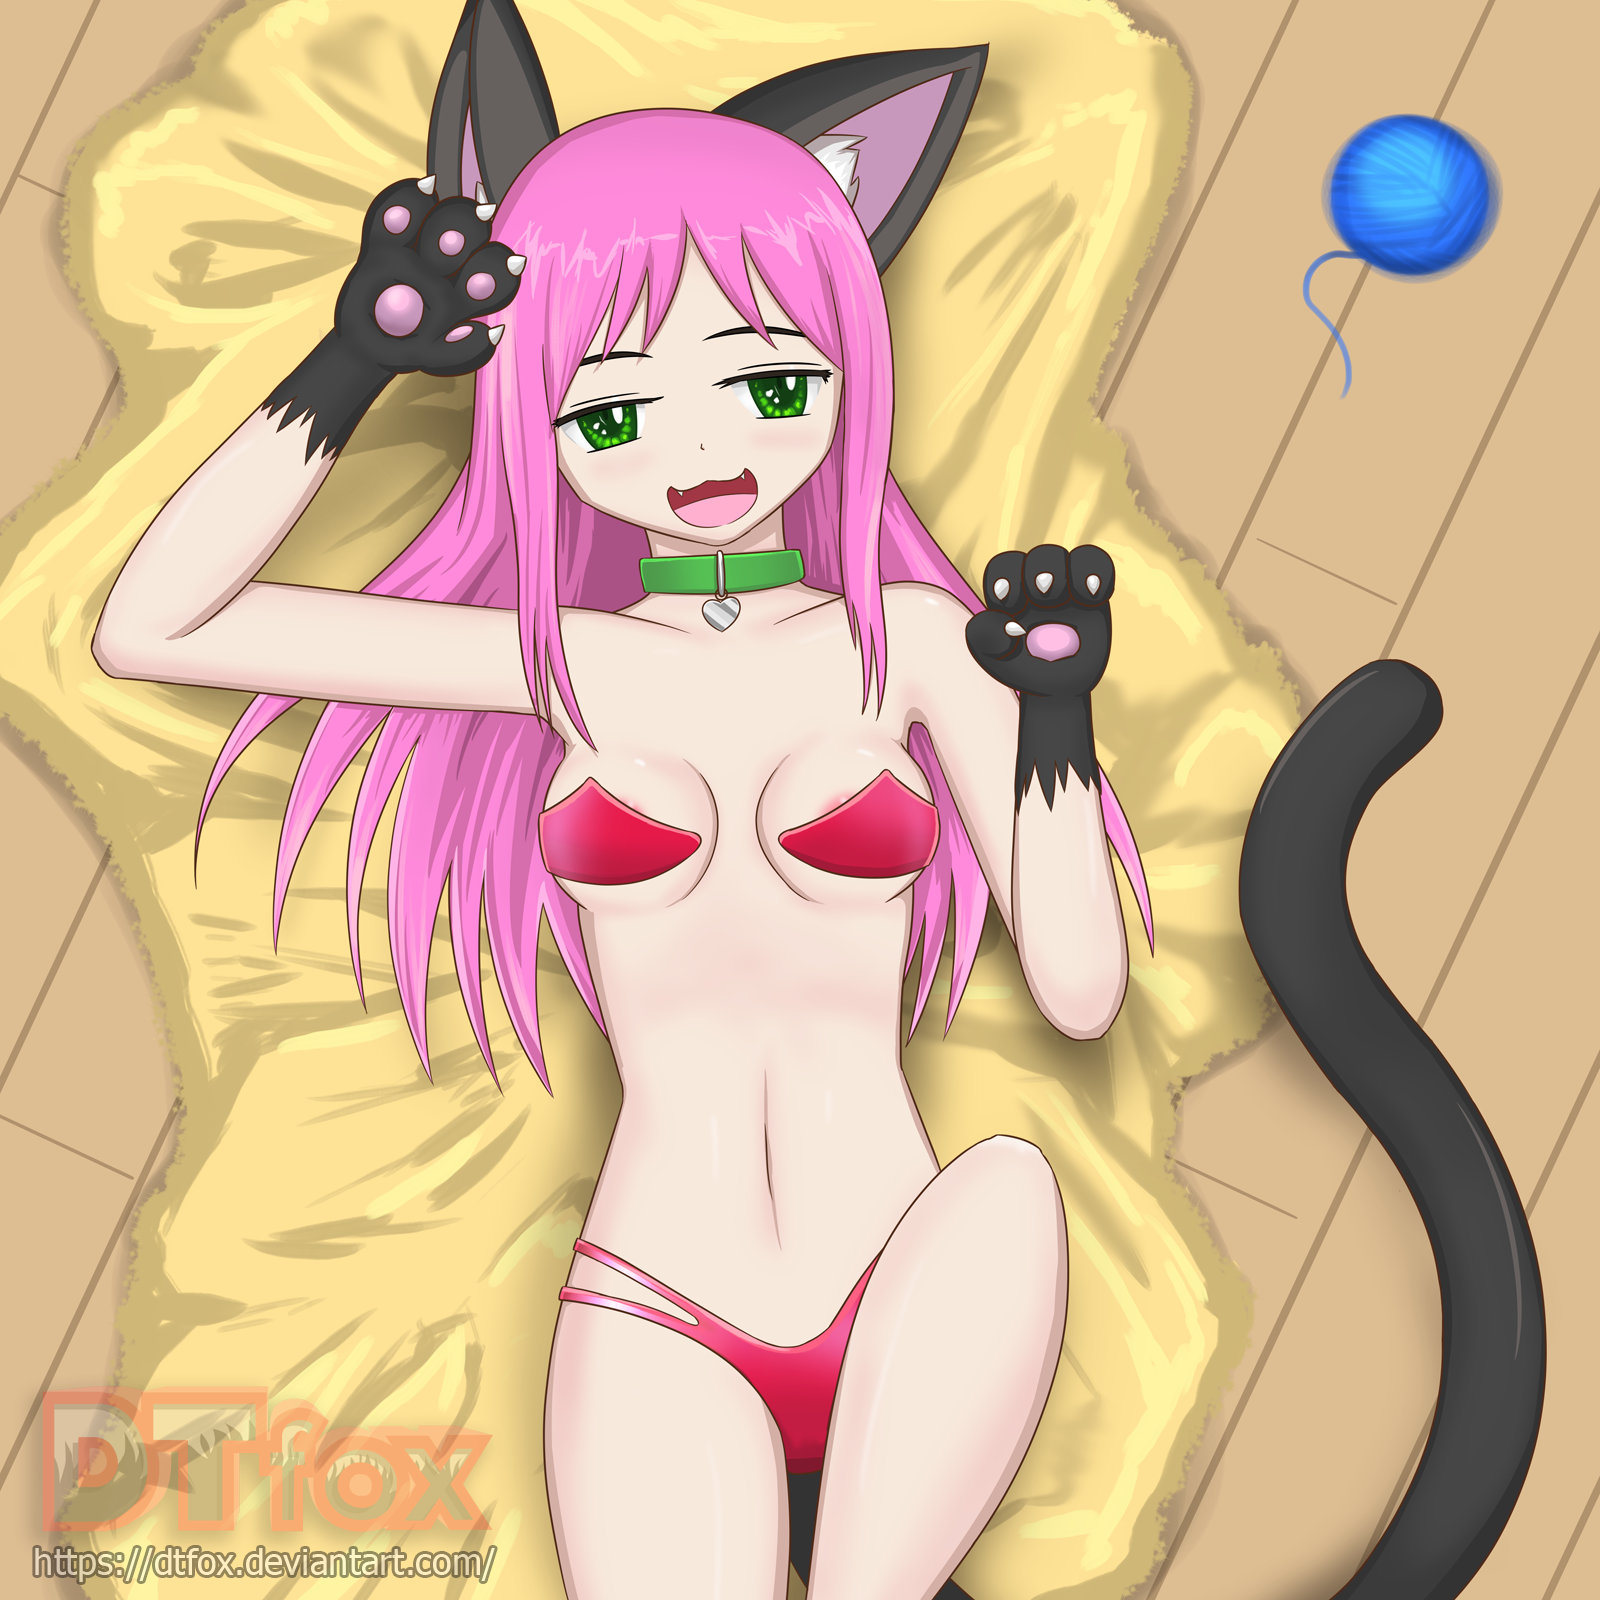 A sexy cat girl lays on the floor suggestively next to a ball of yarn